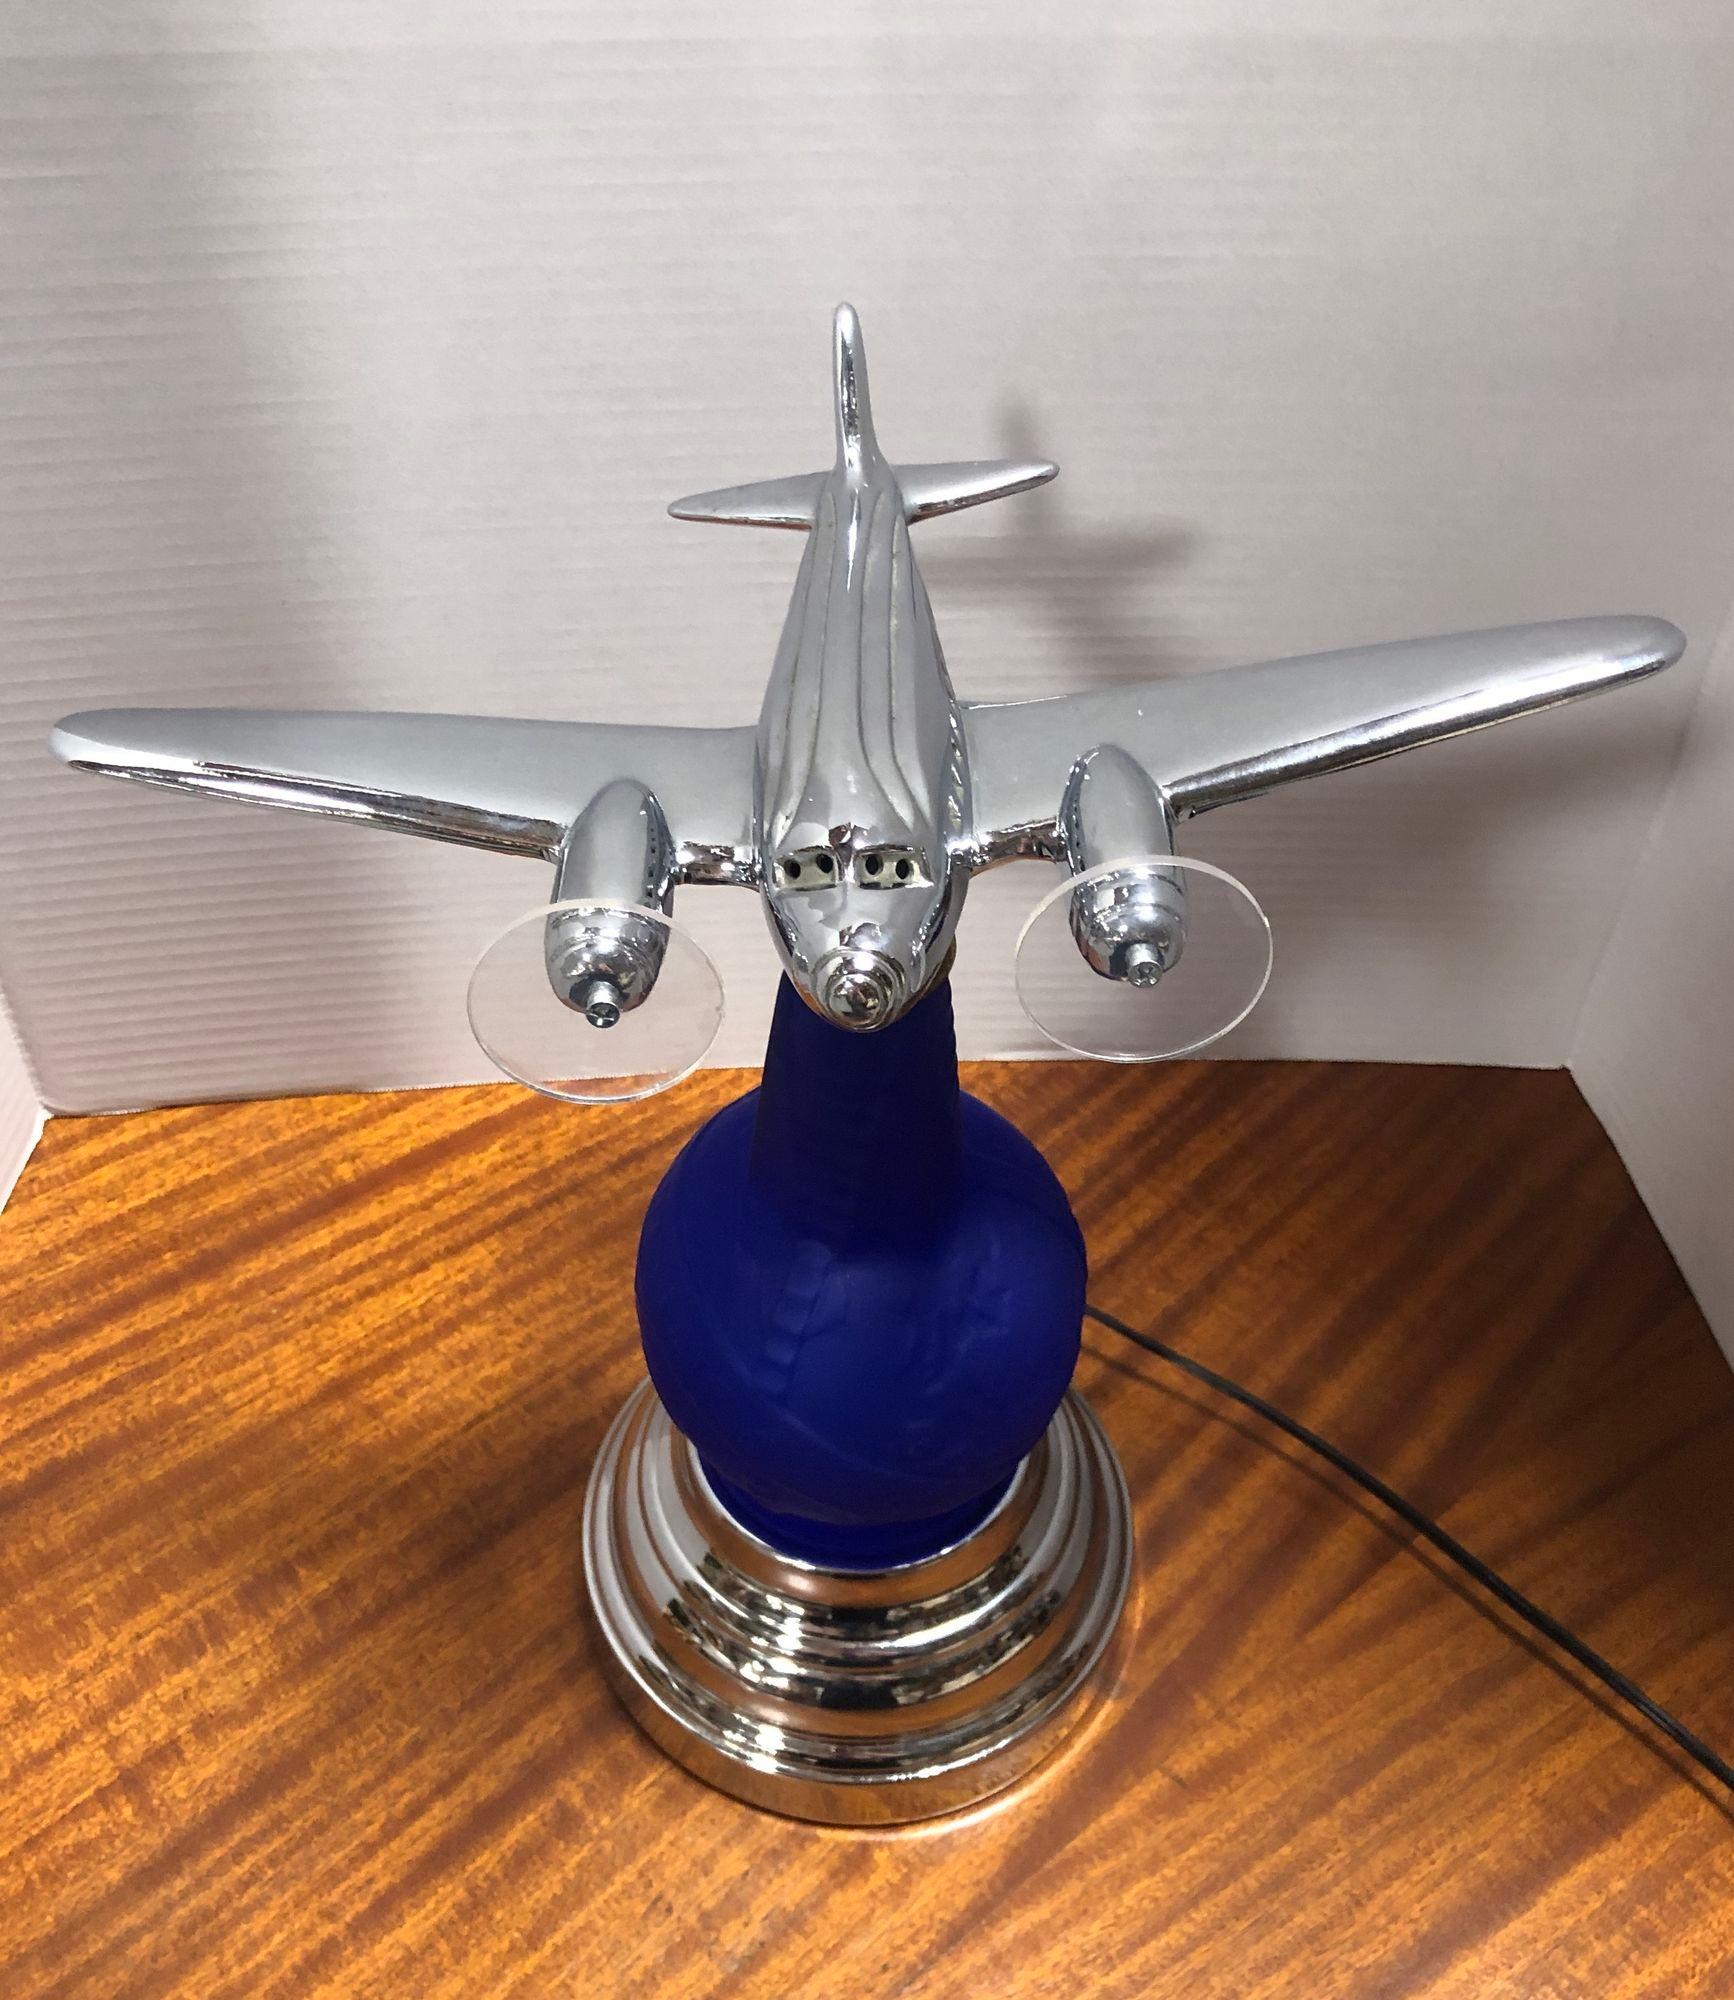 1939 World's Fair Airplane Art Deco Lamp In Excellent Condition For Sale In Van Nuys, CA